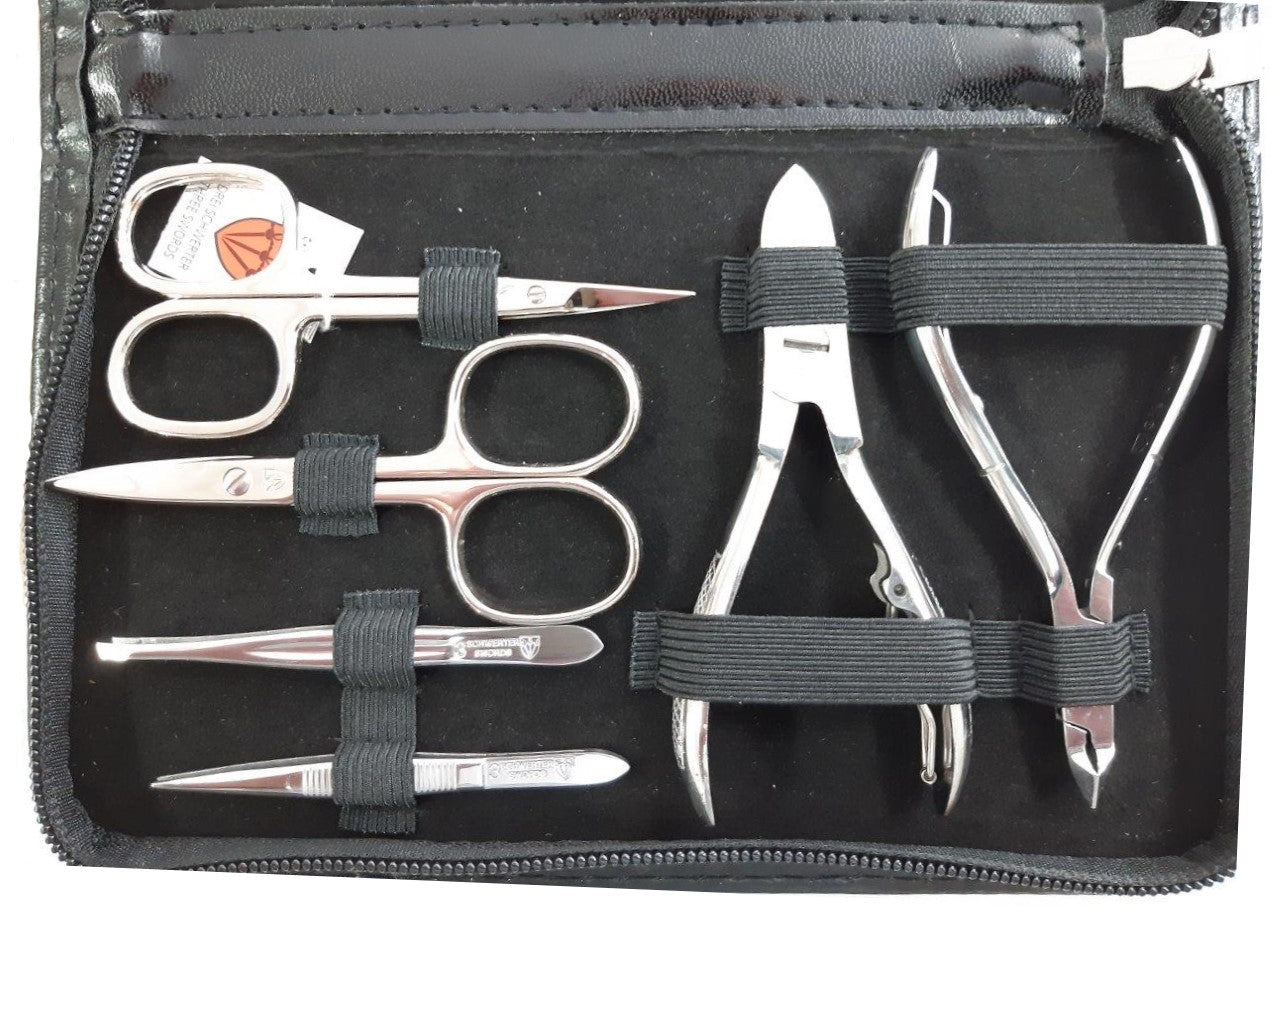 3 Swords Manicure Set: 16 Handmade Steel Nail Tools in a Black Leather Look Case 9210 PN